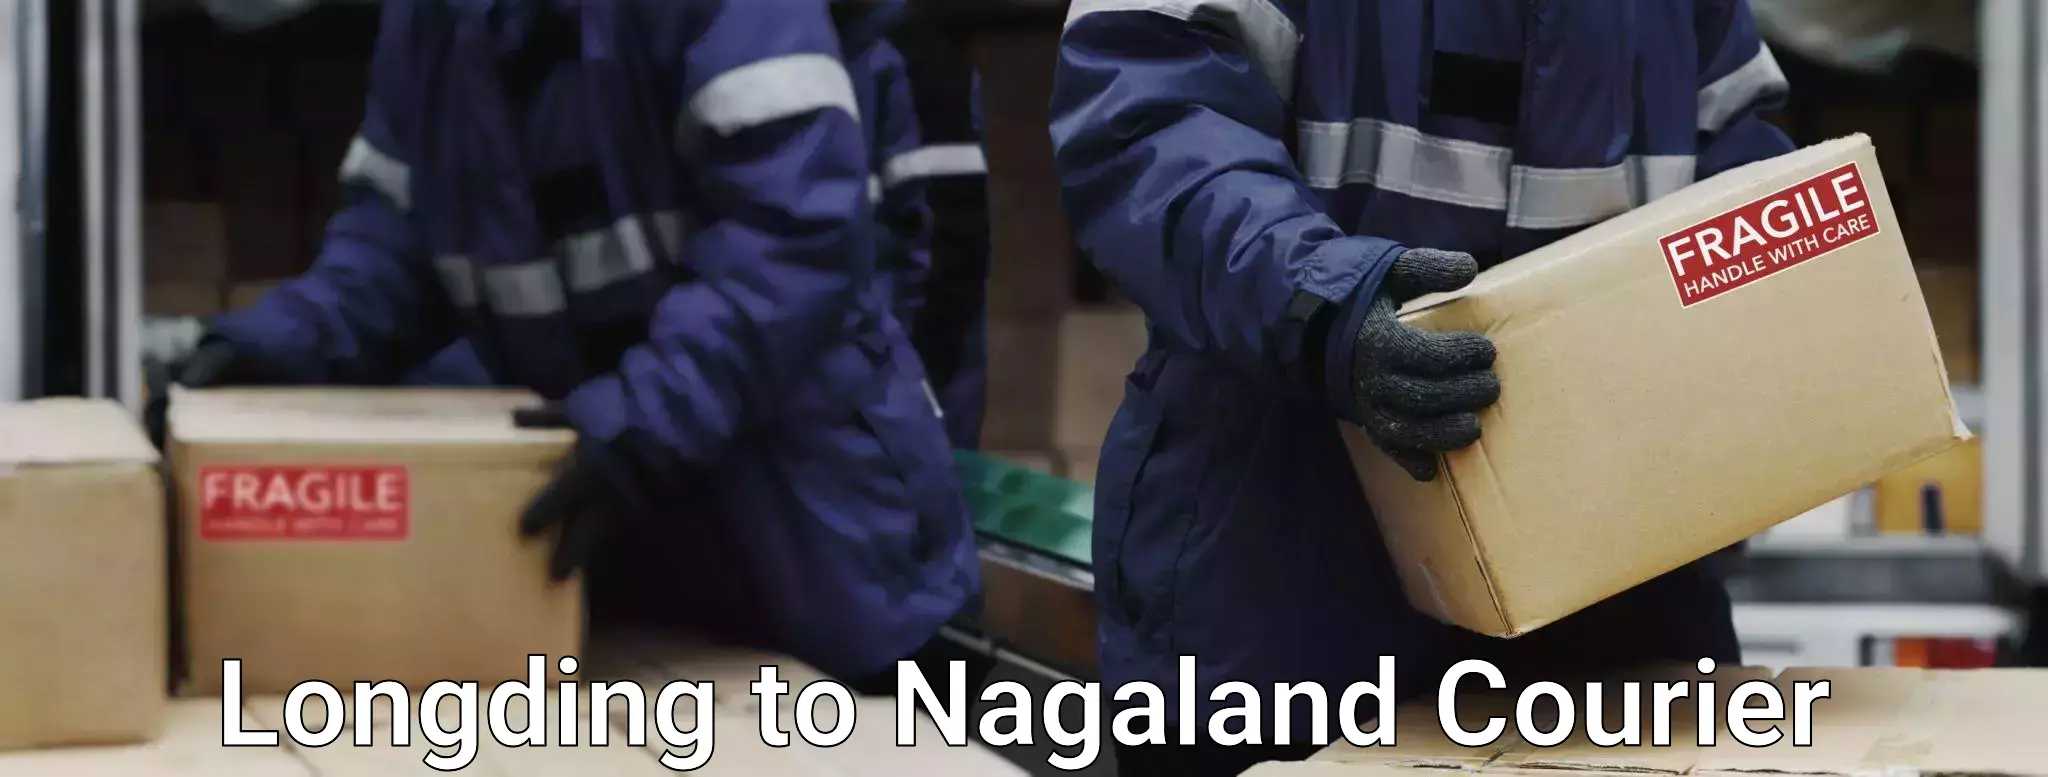 Hassle-free luggage shipping in Longding to Nagaland